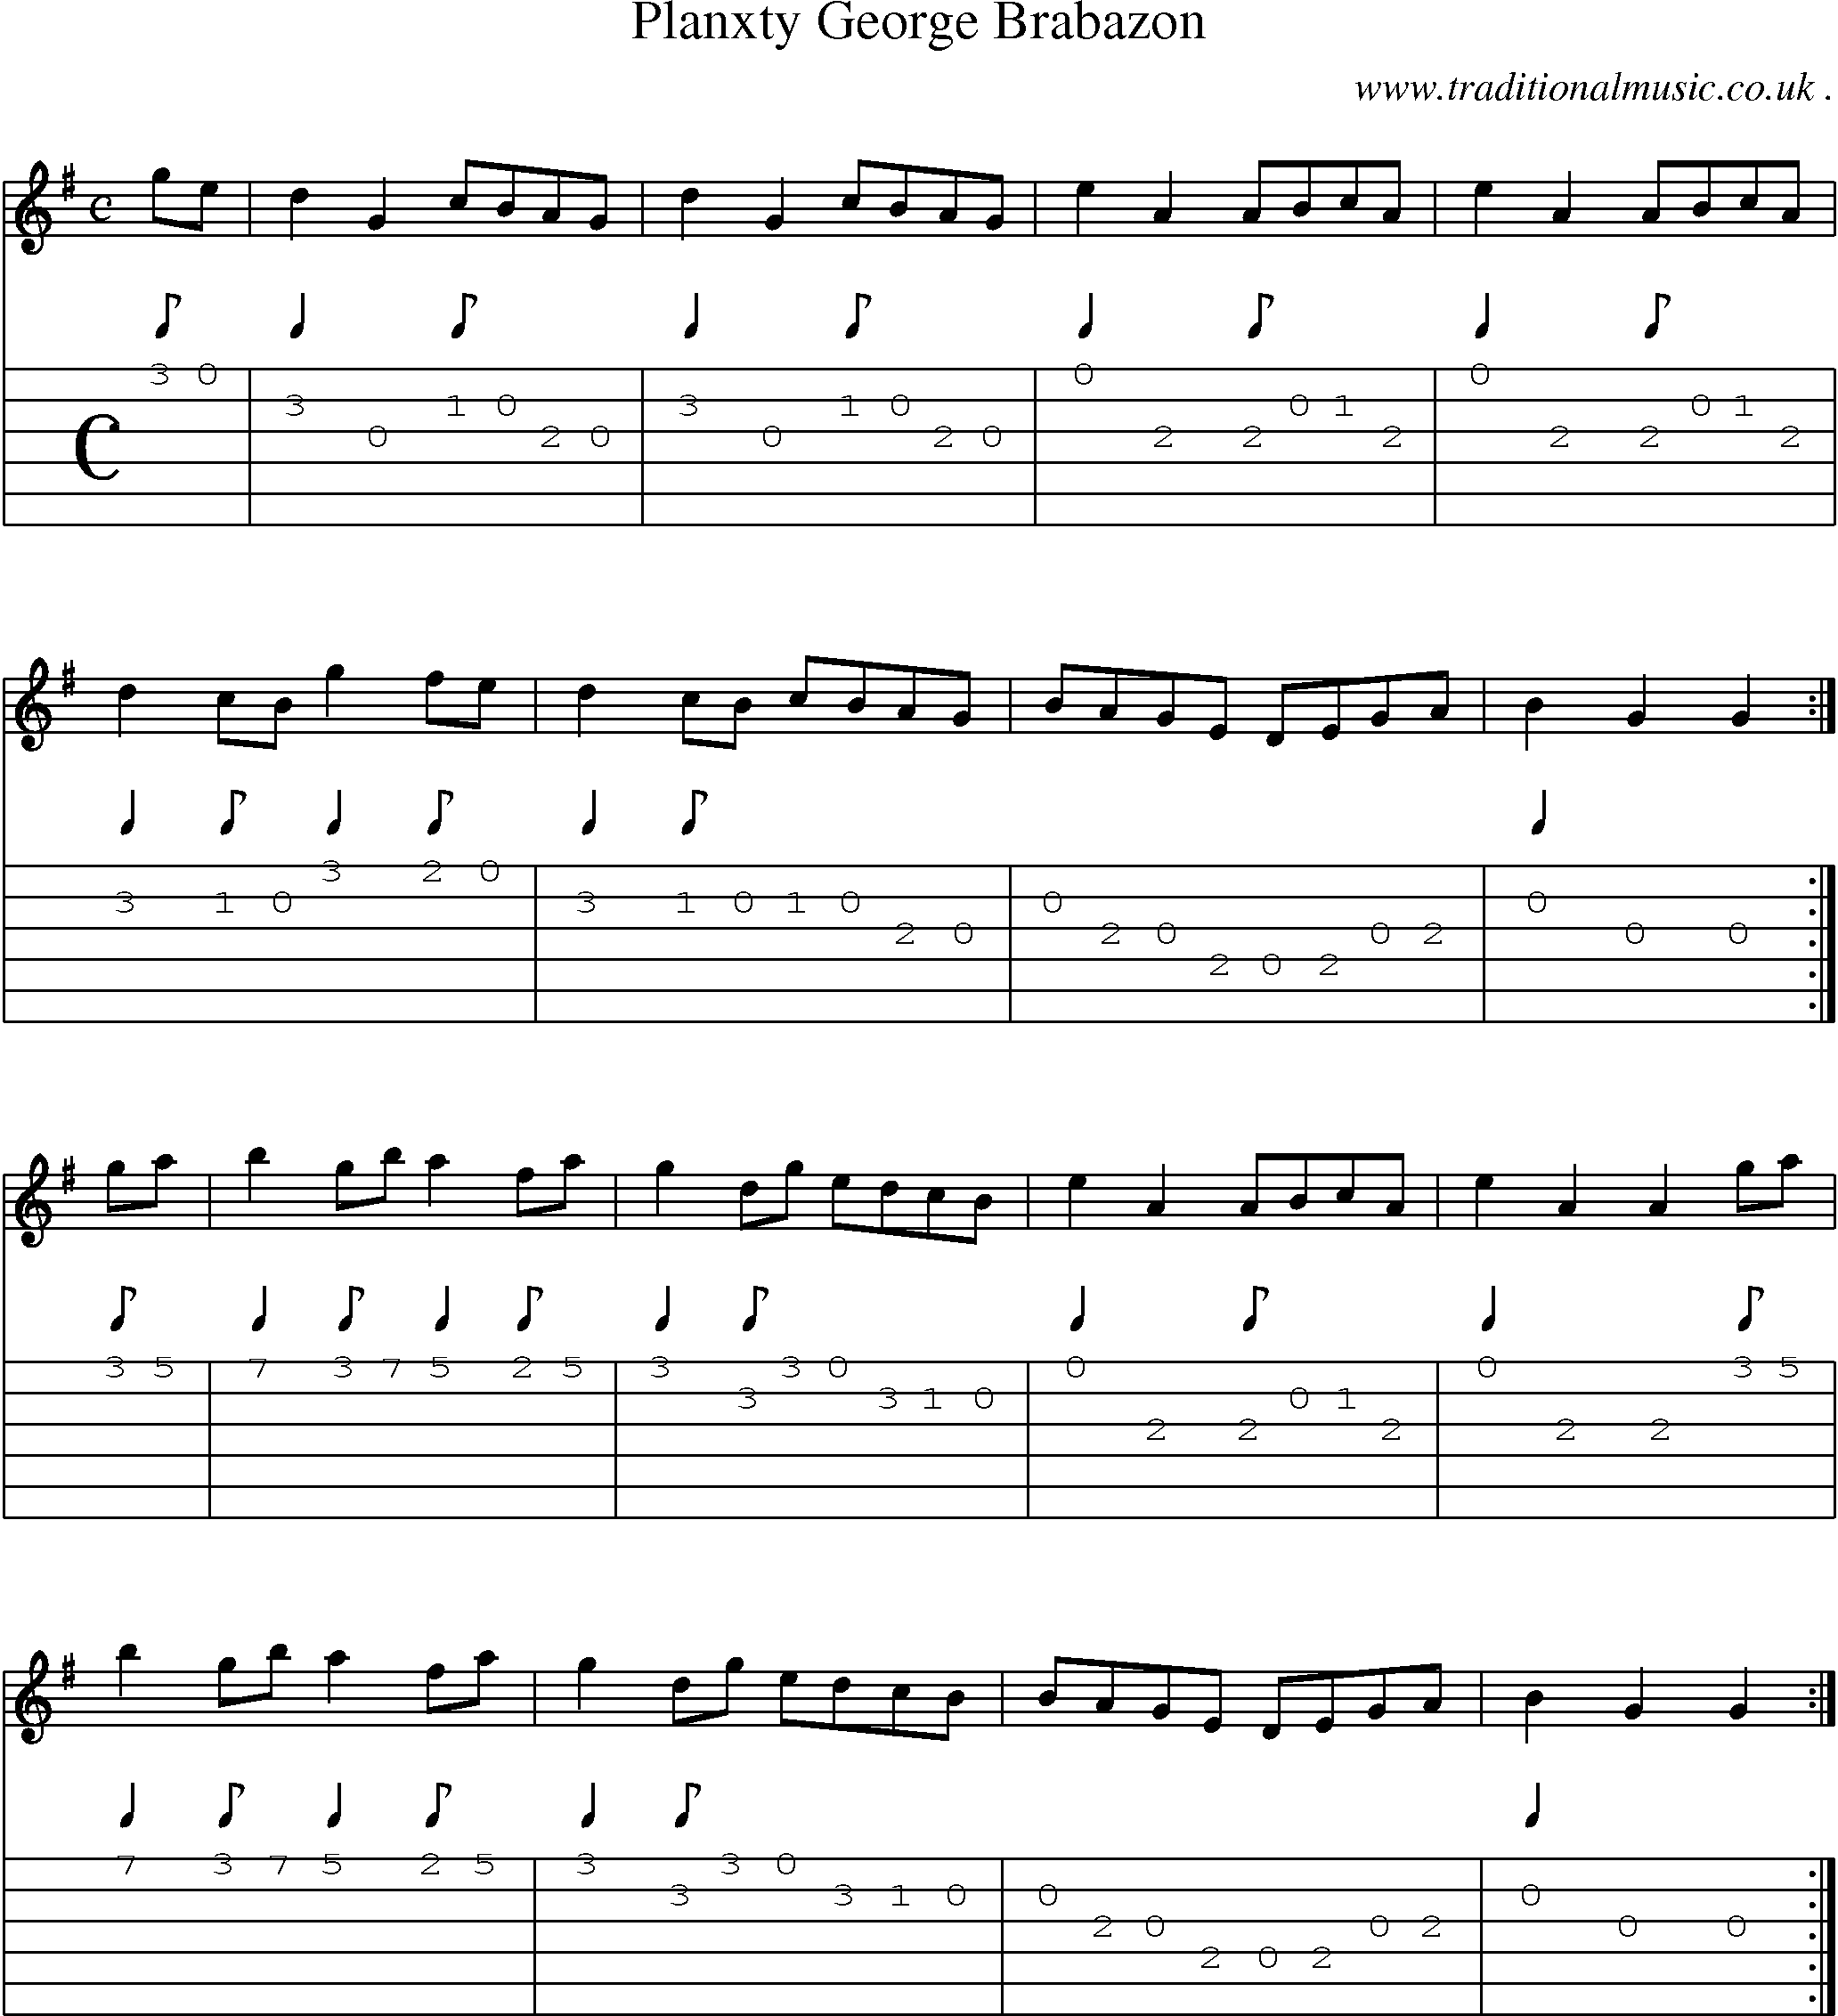 Sheet-Music and Guitar Tabs for Planxty George Brabazon